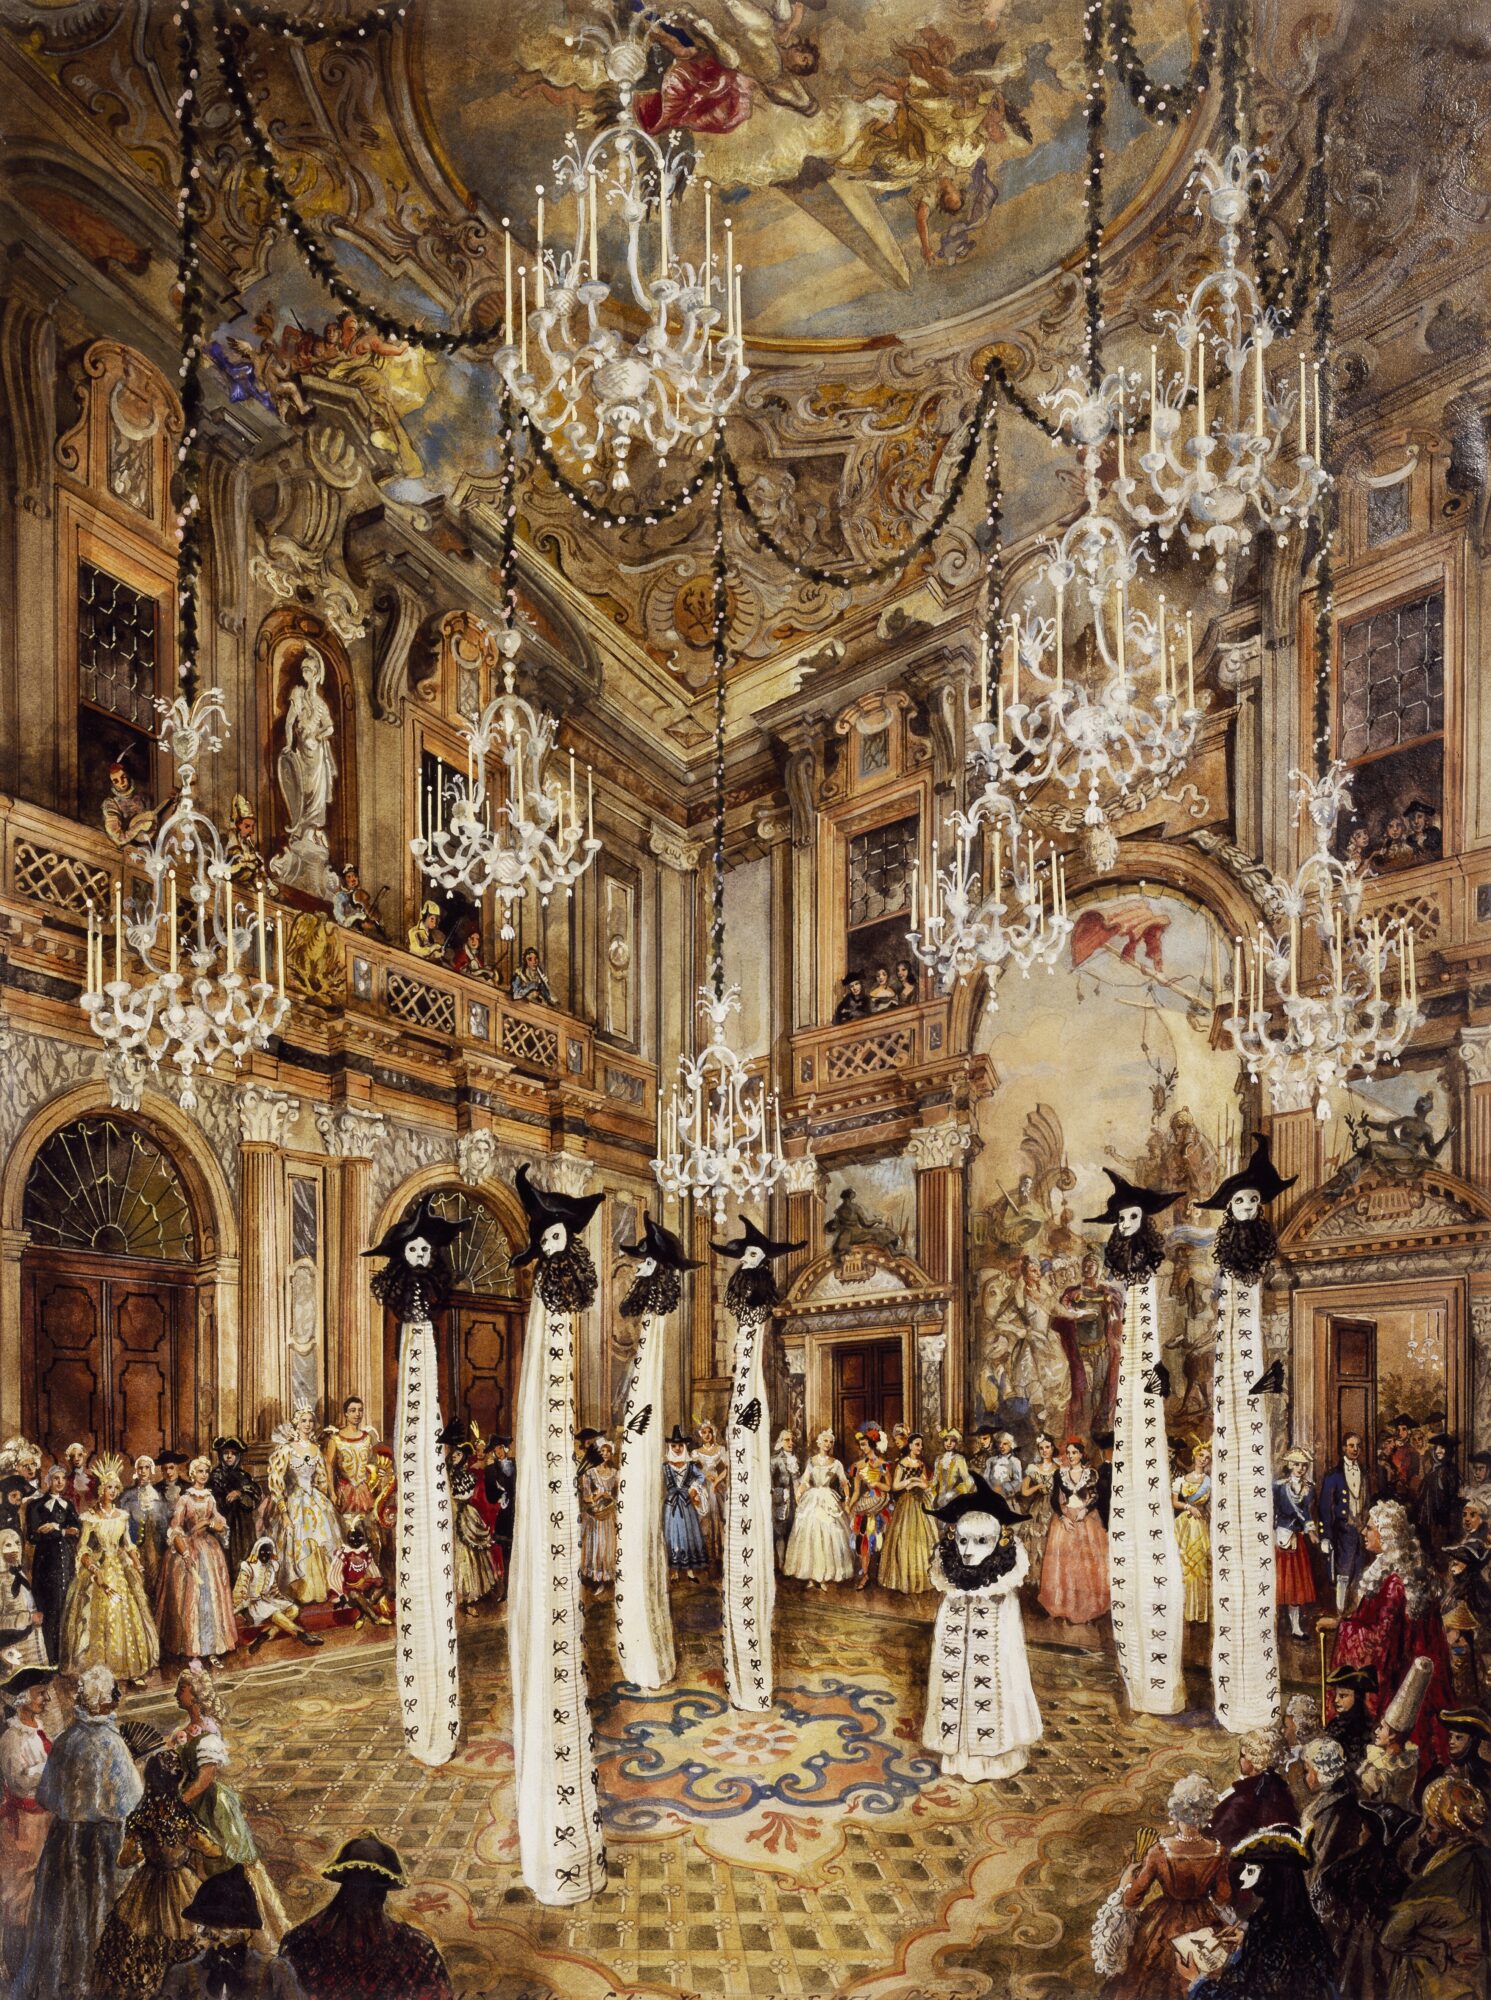 Alexandre Serebriakoff, Entrance of the ghosts of Venice during a fancy dress party, in 1951 by Charles de Beistegui in Palazzo Labia, watercolour / Agefotostock